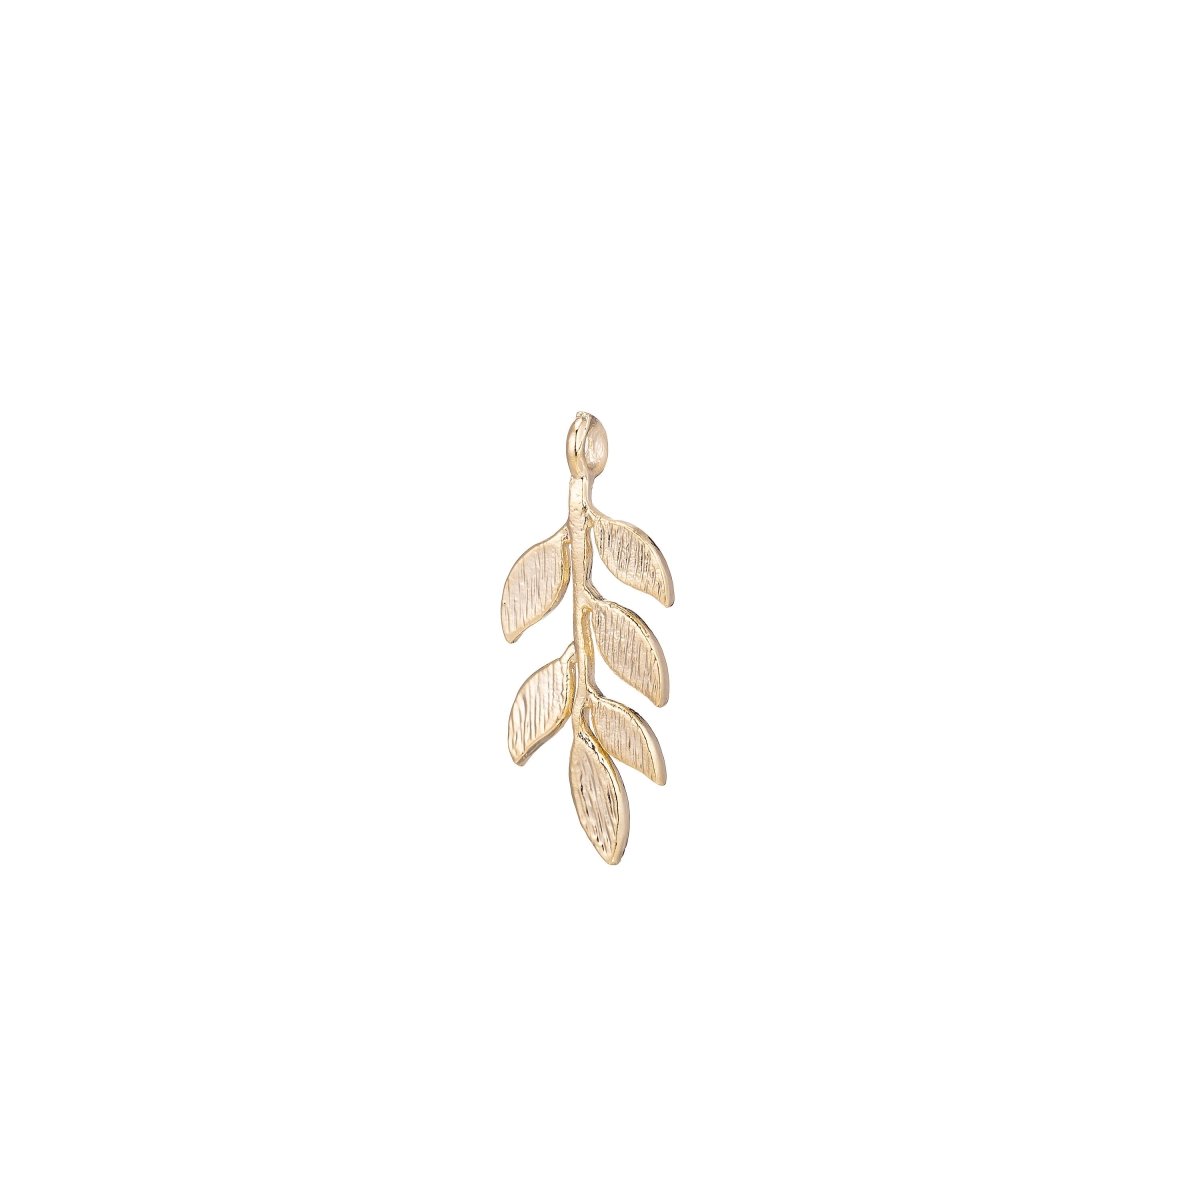 Dangle 18k Gold Filled Laurel Leaf Charm for Bracelet Necklace Pendant Earring Floral Dainty Findings for Jewelry MakingC-390 - DLUXCA